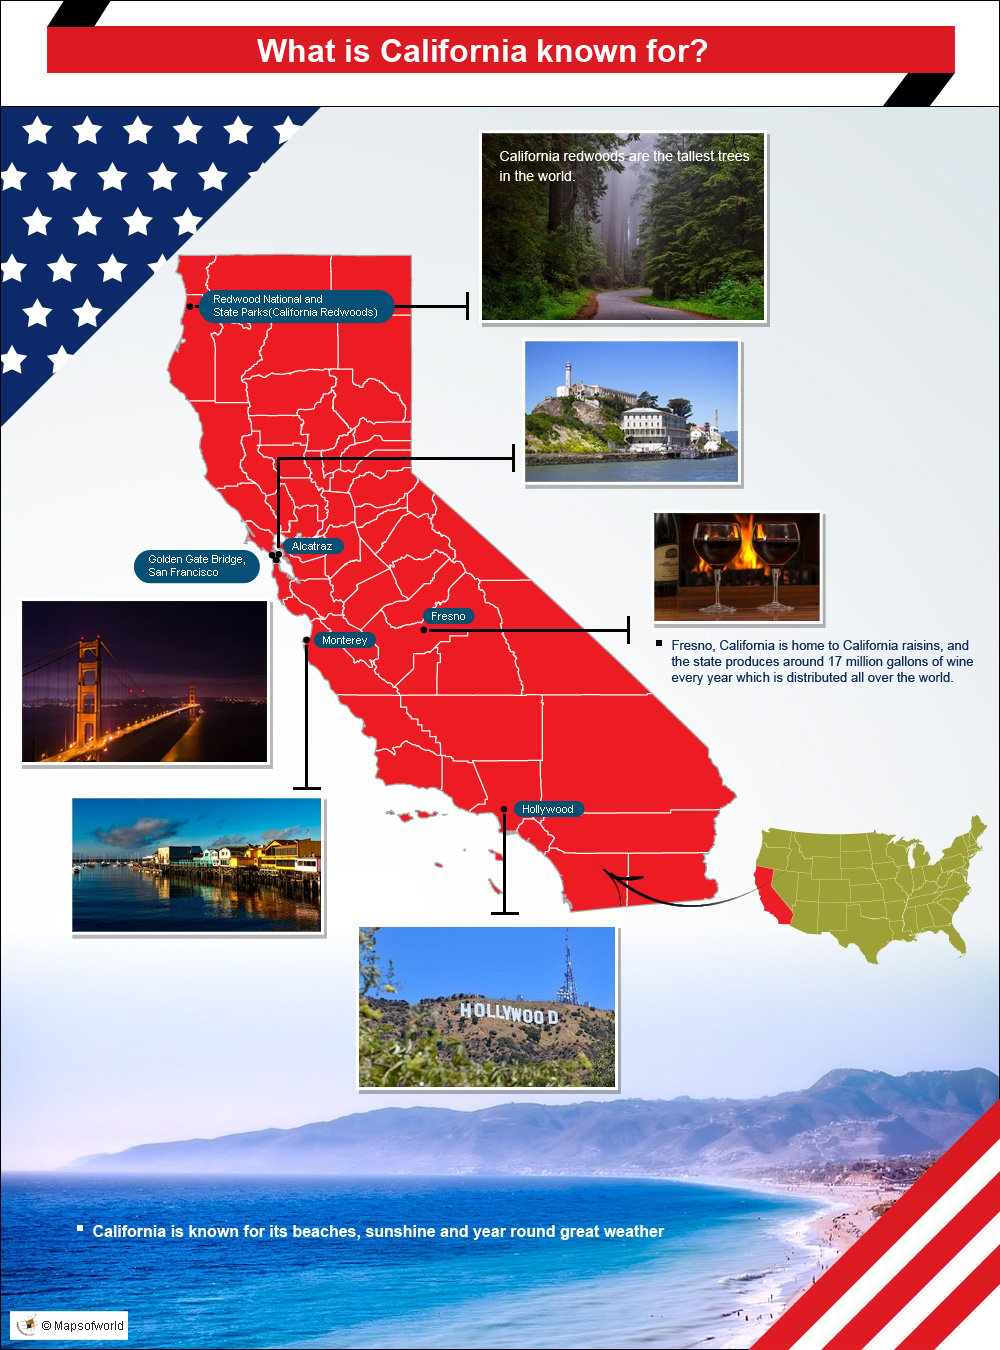 Infographic on what California is known for